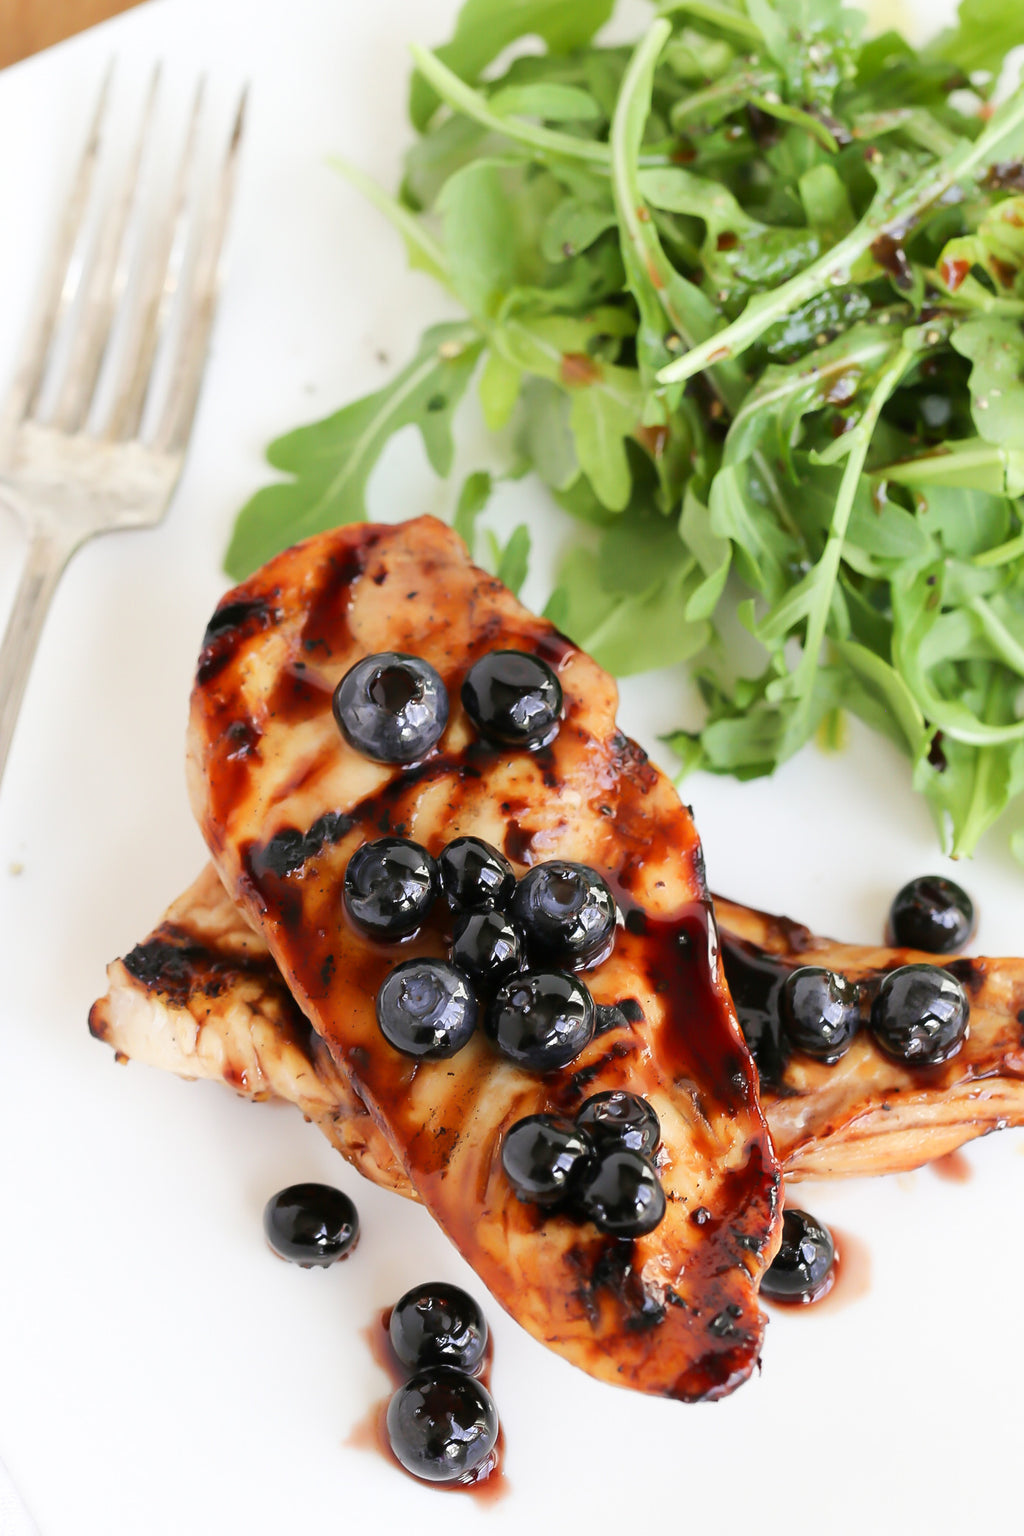 Grilled Chicken with Blueberry Sauce | Wozz! Kitchen Creations